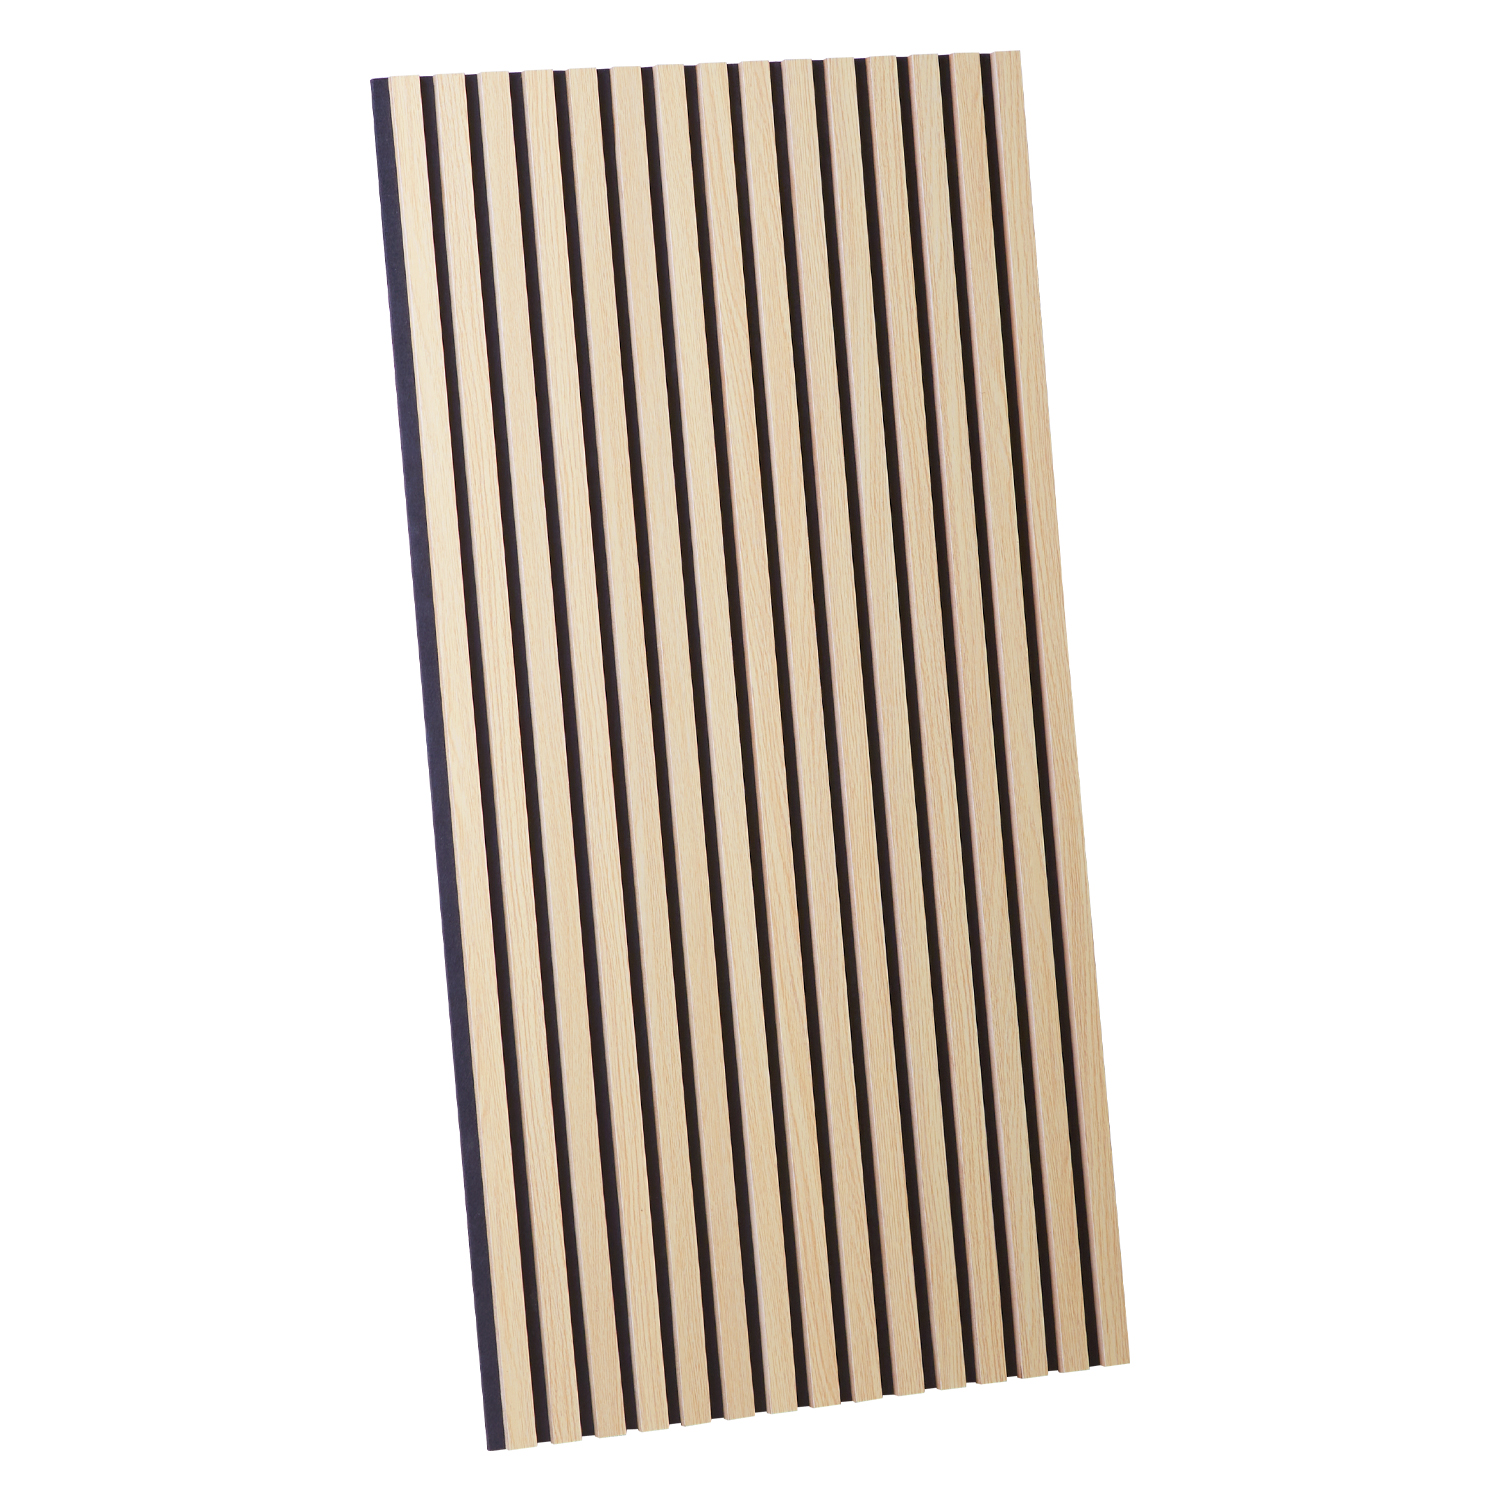 1, 2 or 4 Wall panels 60 x 120 cm Wood paneling for walls Acoustic panels Bedroom paneling Wall cladding Acoustic sound panels Sound proof panels